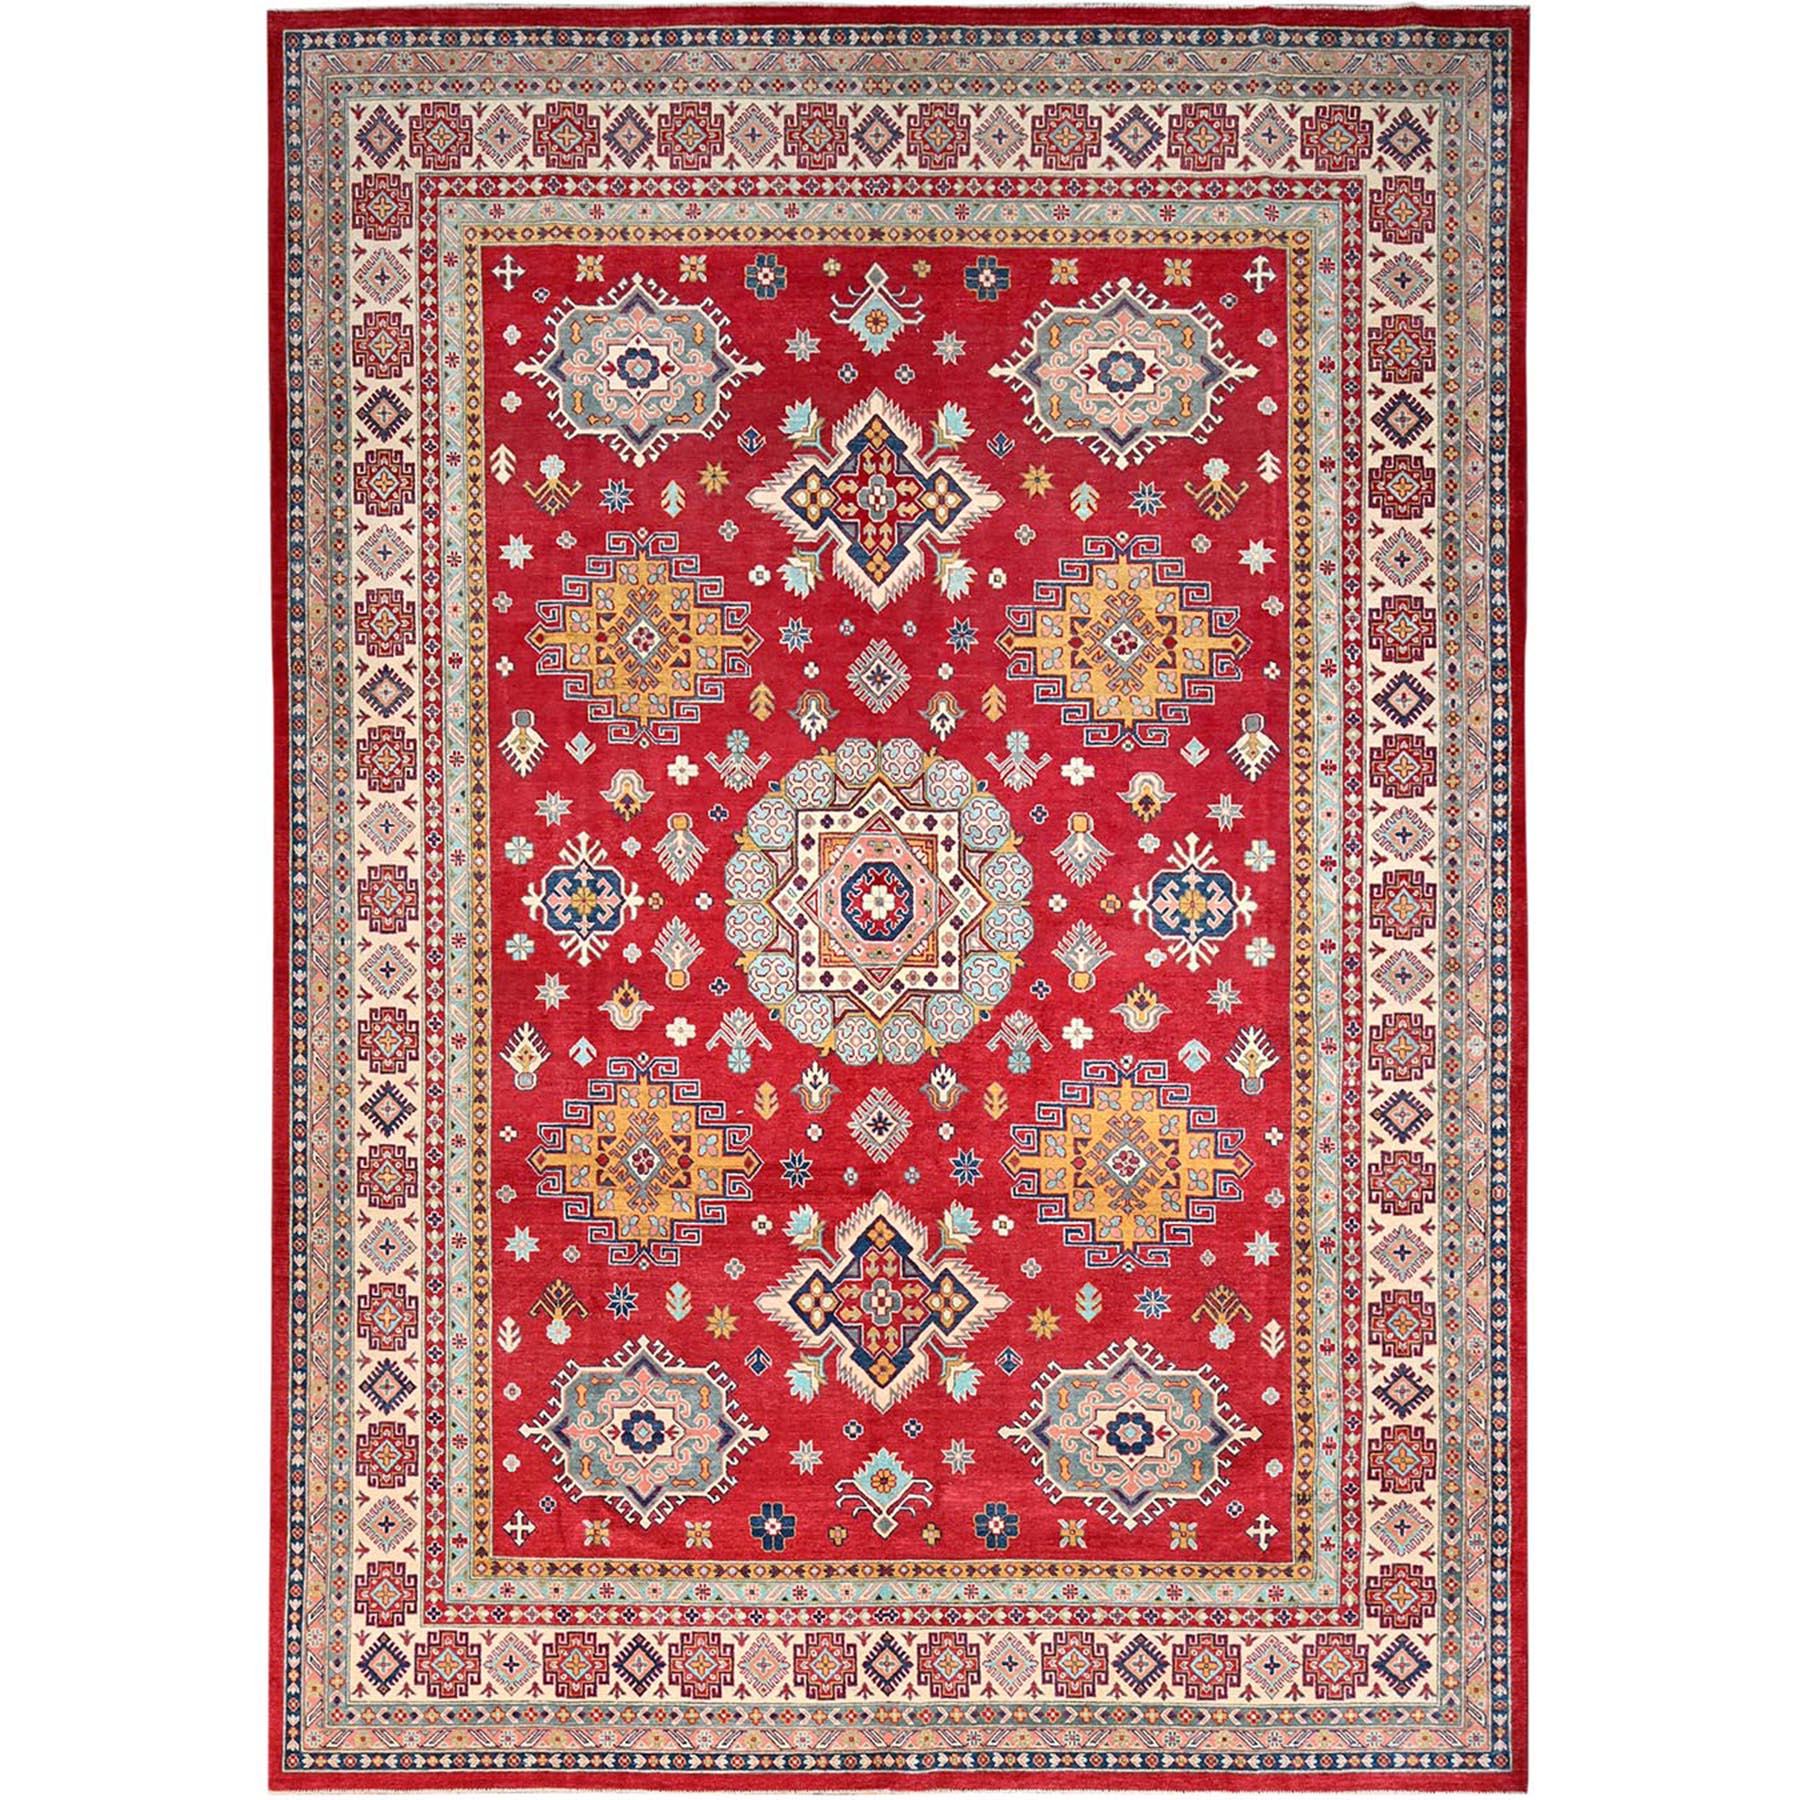 Imperial Red, Hand Knotted Densely Woven Kazak Design, Tribal Medallions, Luxurious Wool, Vegetable Dyes Oriental Rug